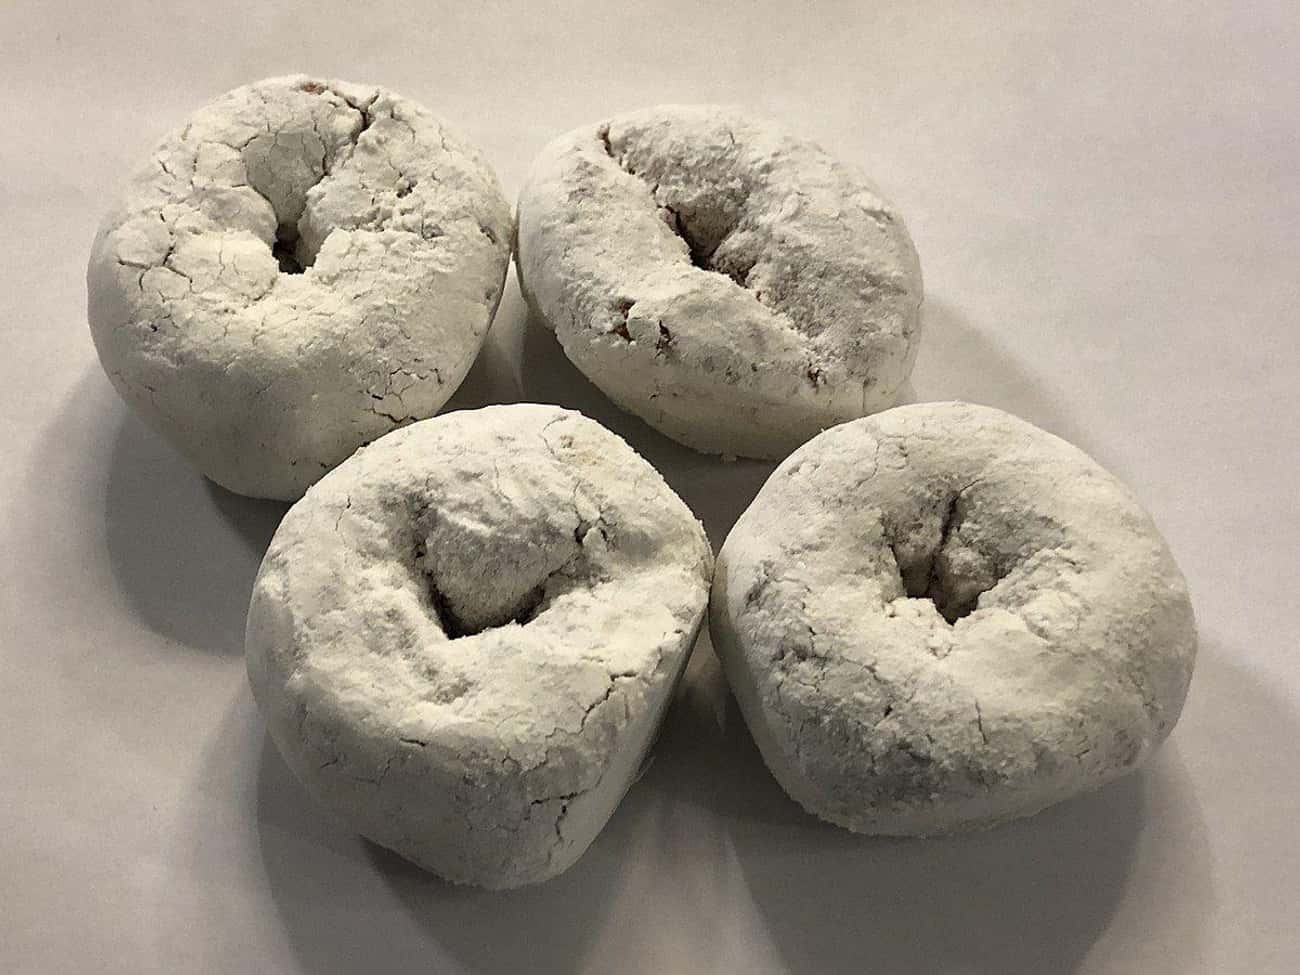 Powdered Donuts Can Be Covered In The Same Stuff You Find In Paint